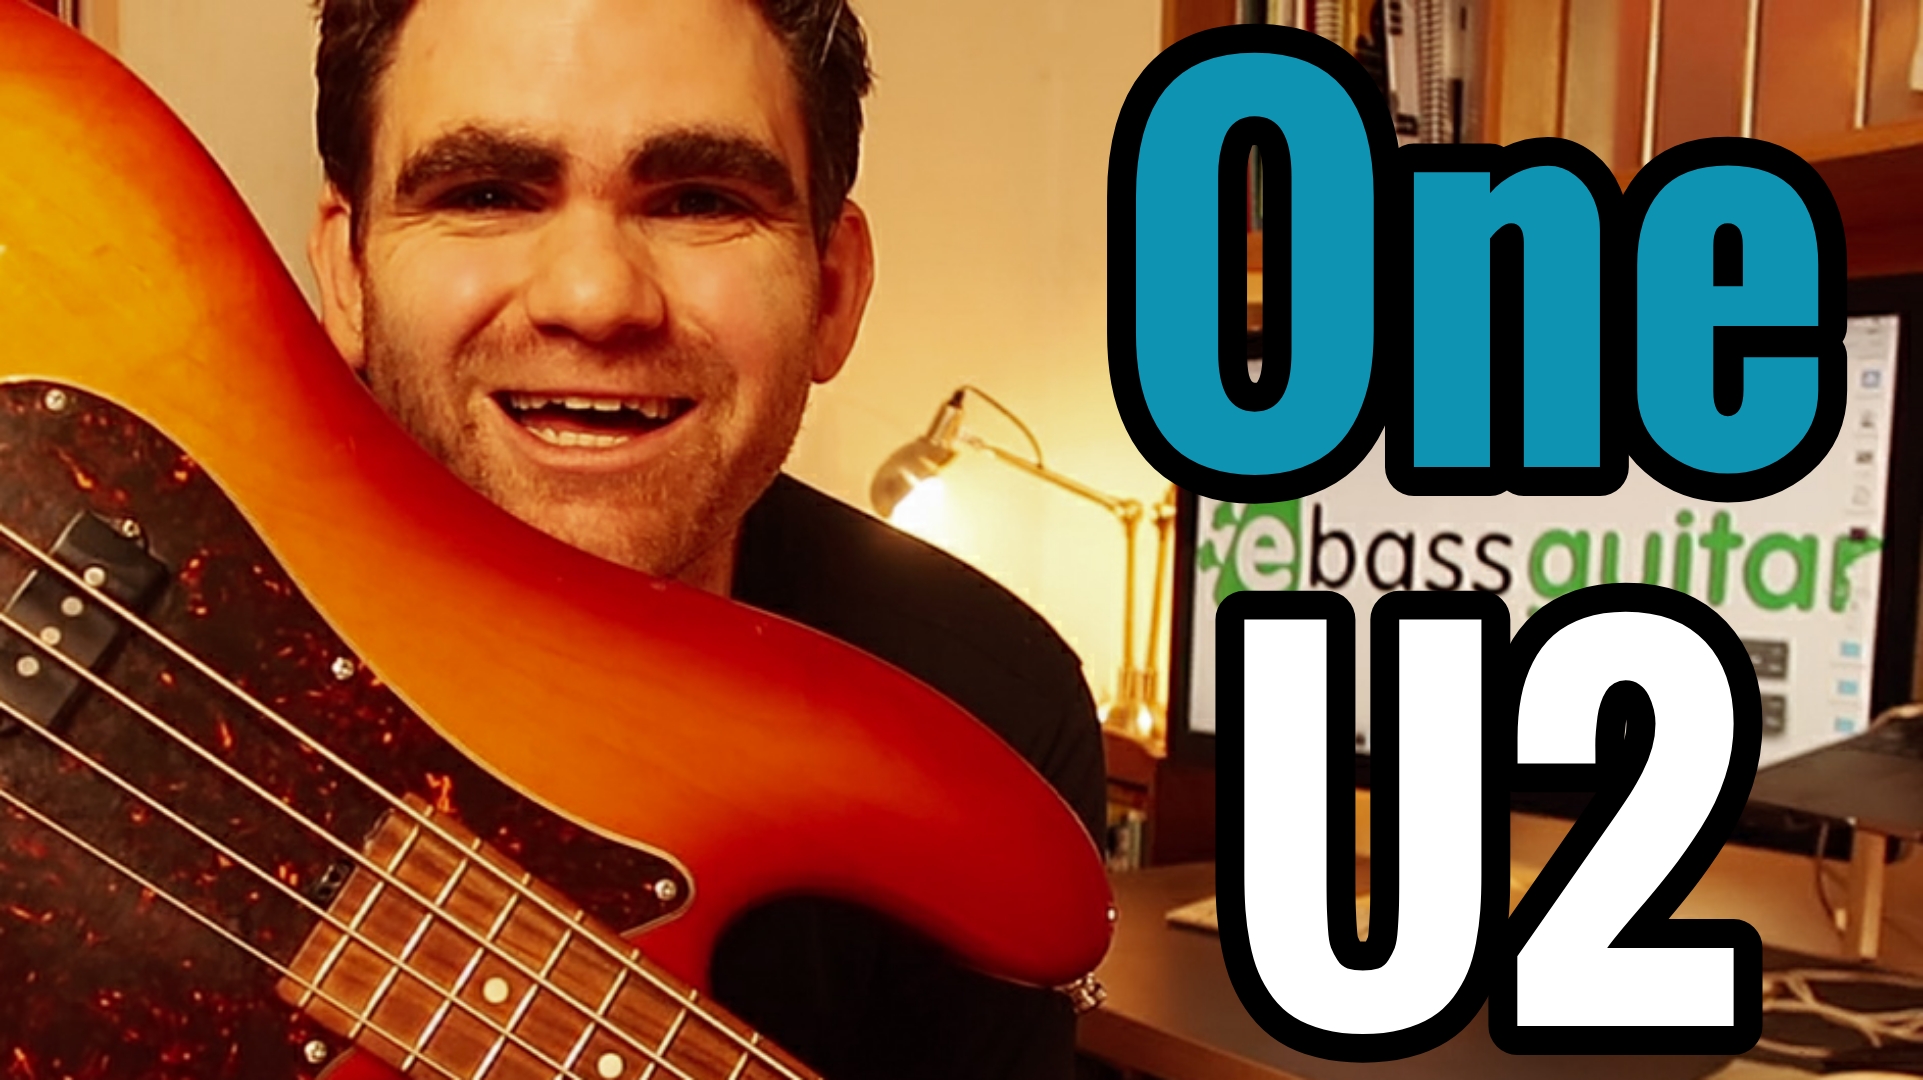 Learn One By U2 on Bass Guitar (Simple Songs For Beginners) – YT129